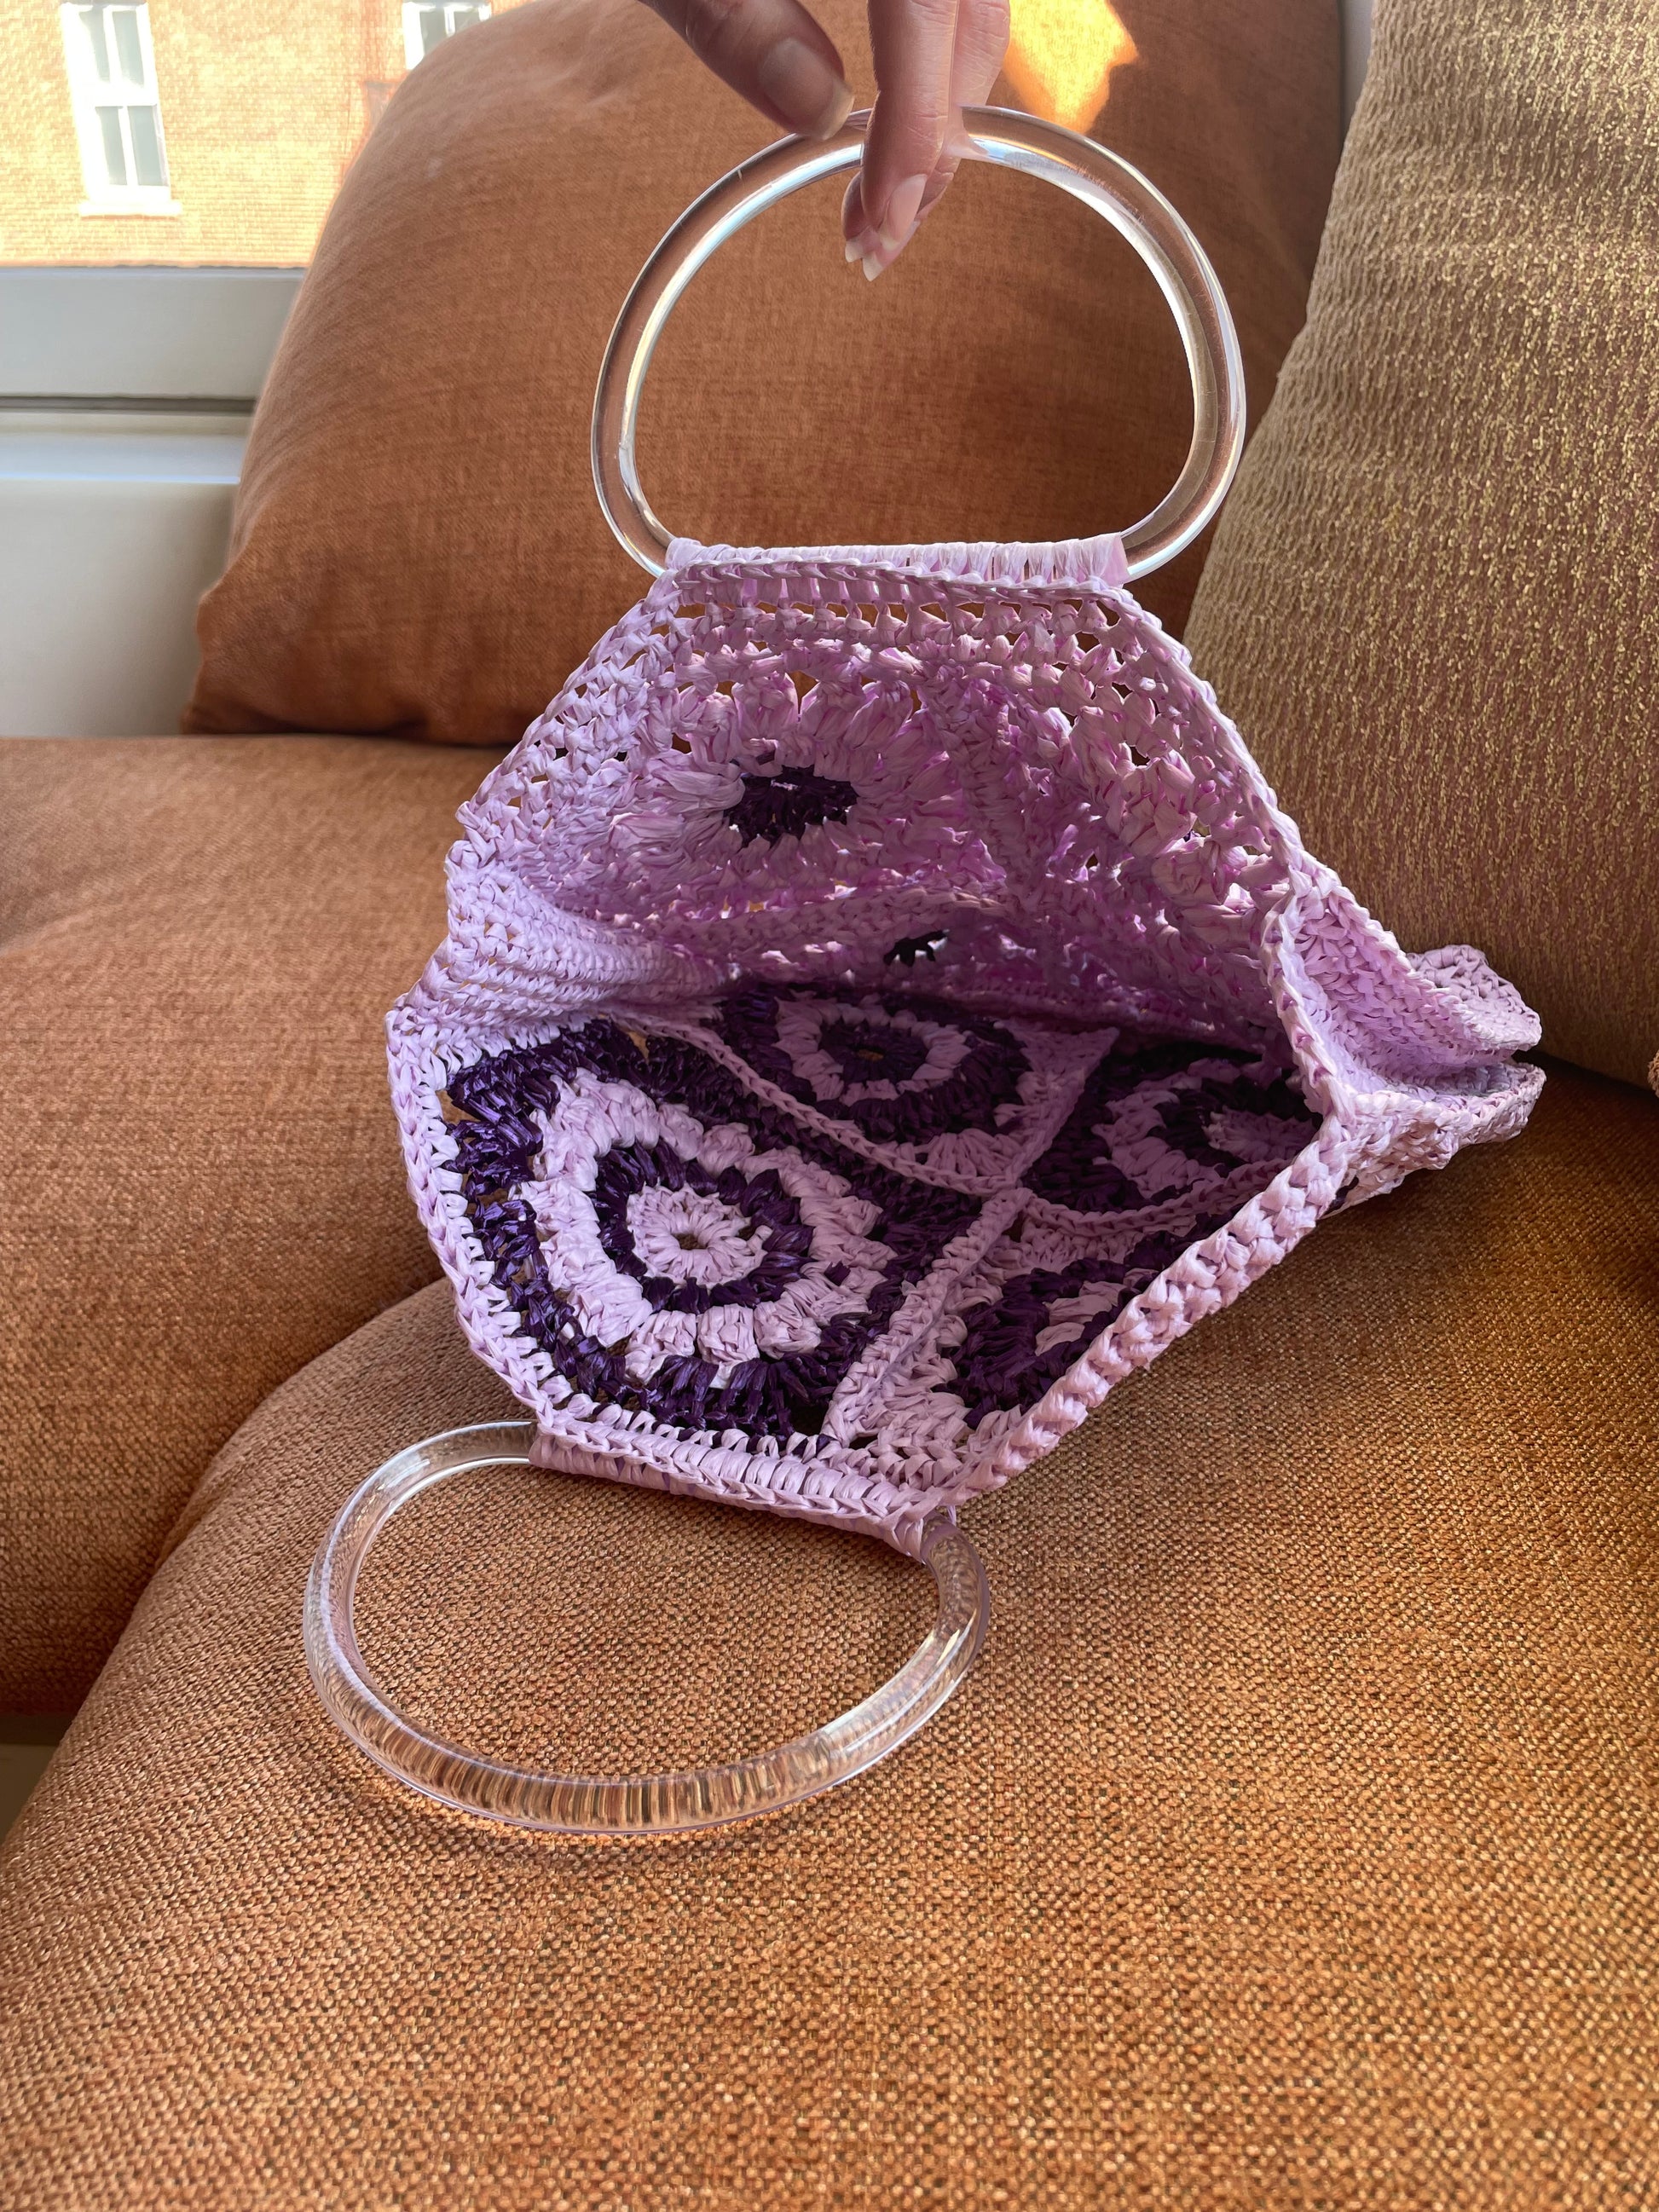 Model holding and showing the inside of the Granny Square frame bag